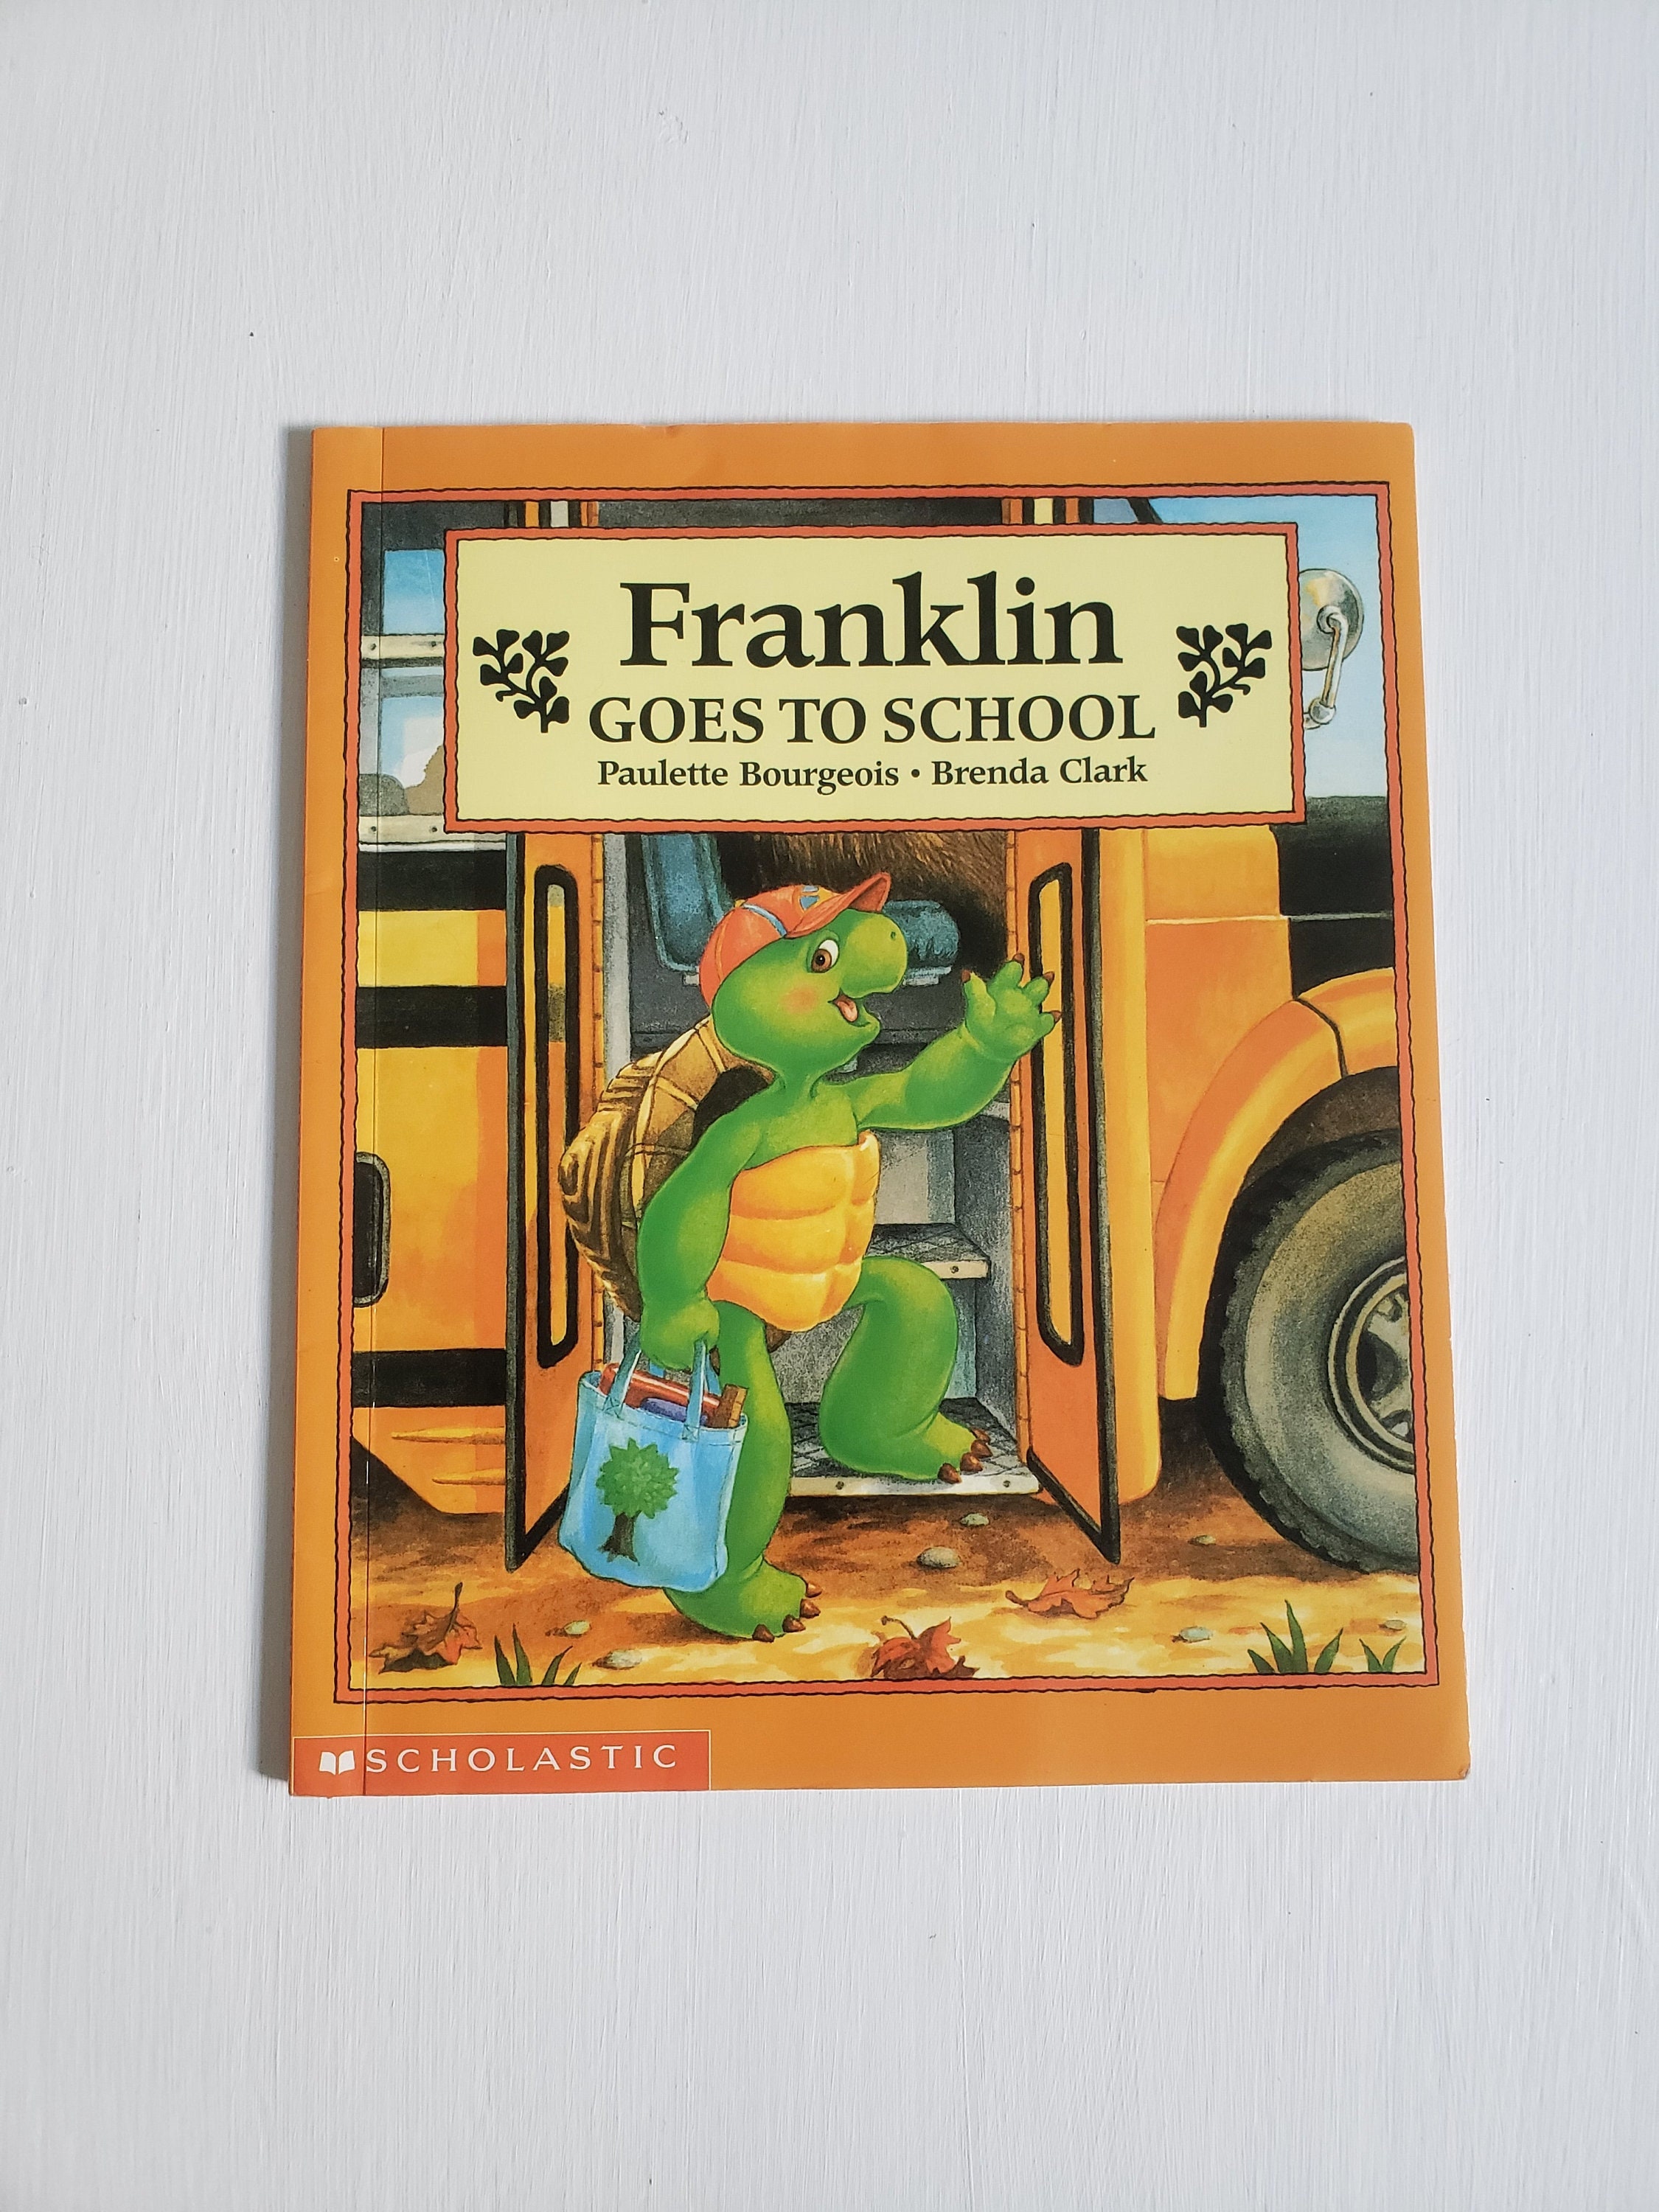 Lot 4 Scholastic Franklin the Turtle Children's Books by Bourgeois & Clark